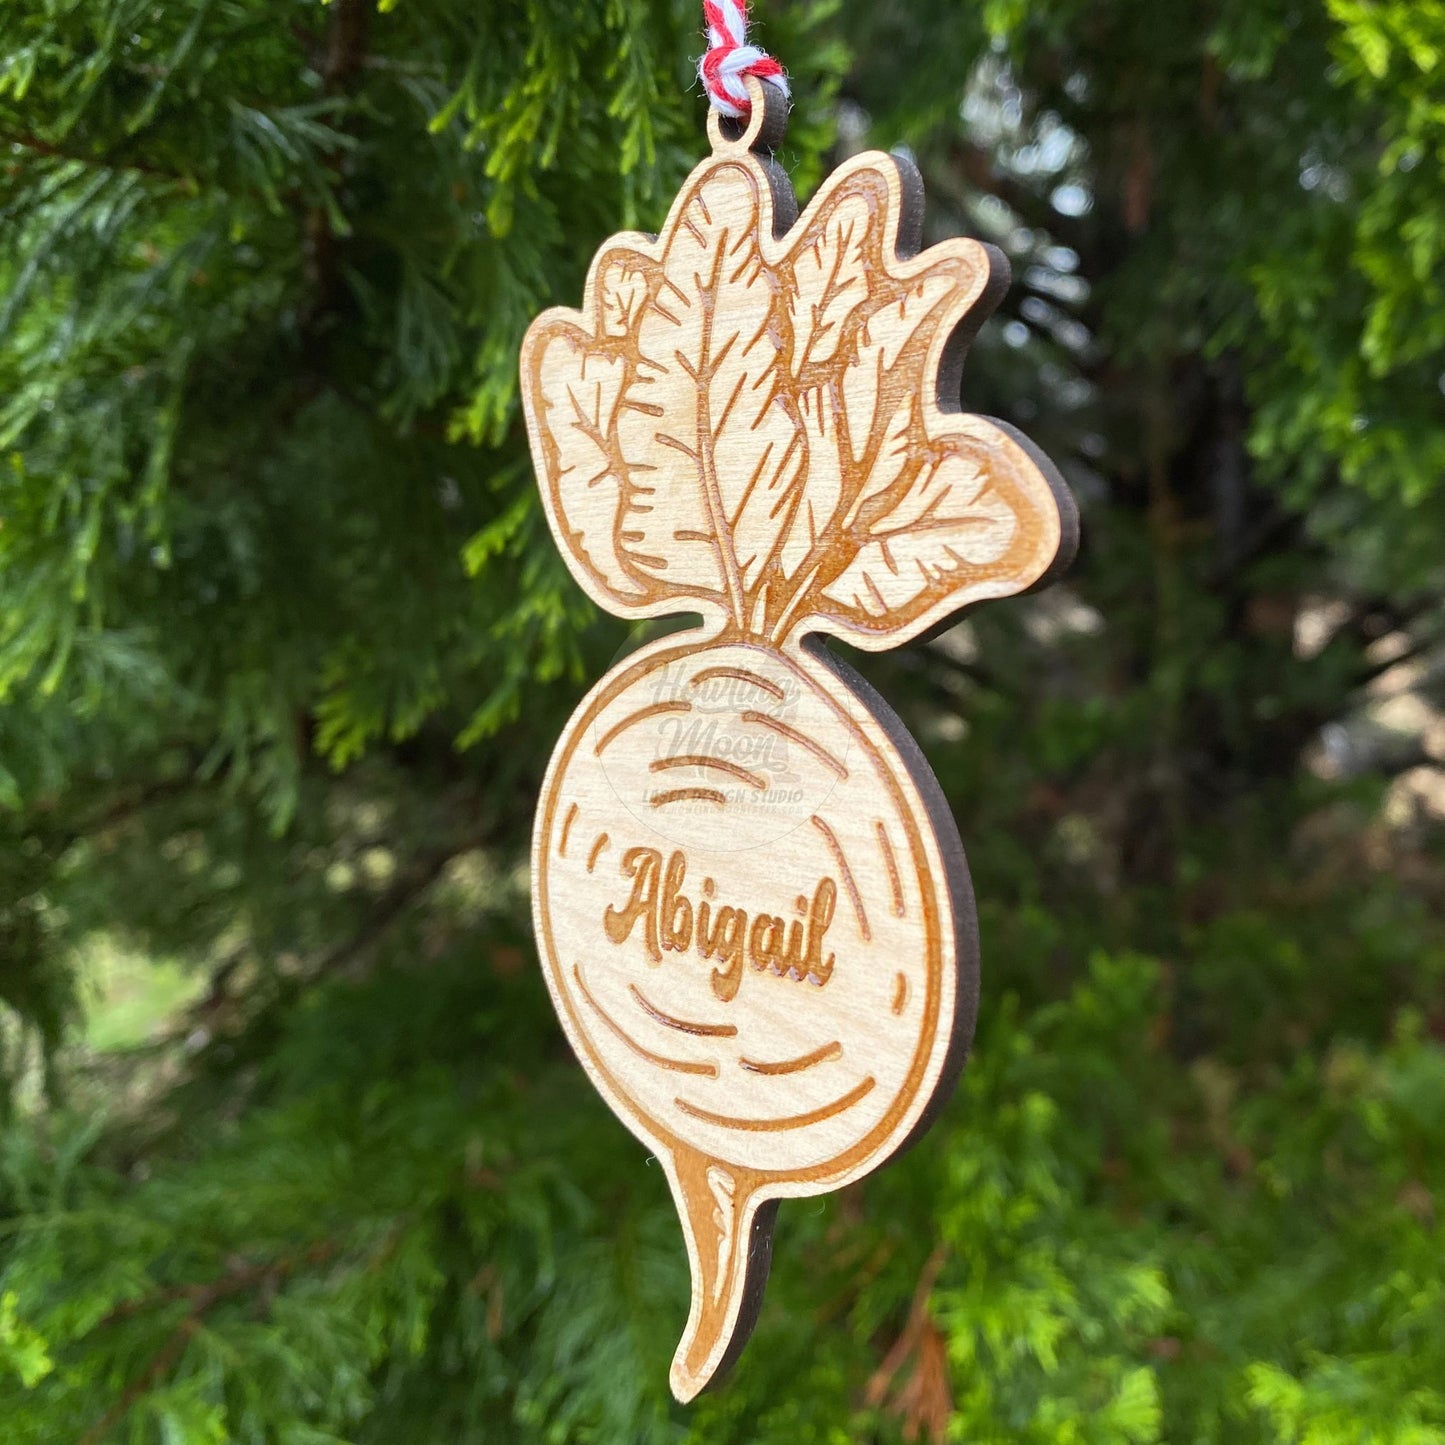 Side view of personalized garden beet ornament with red & white twine ribbon hanging from a coniferous tree - made by Howling Moon Laser Design in Virginia USA